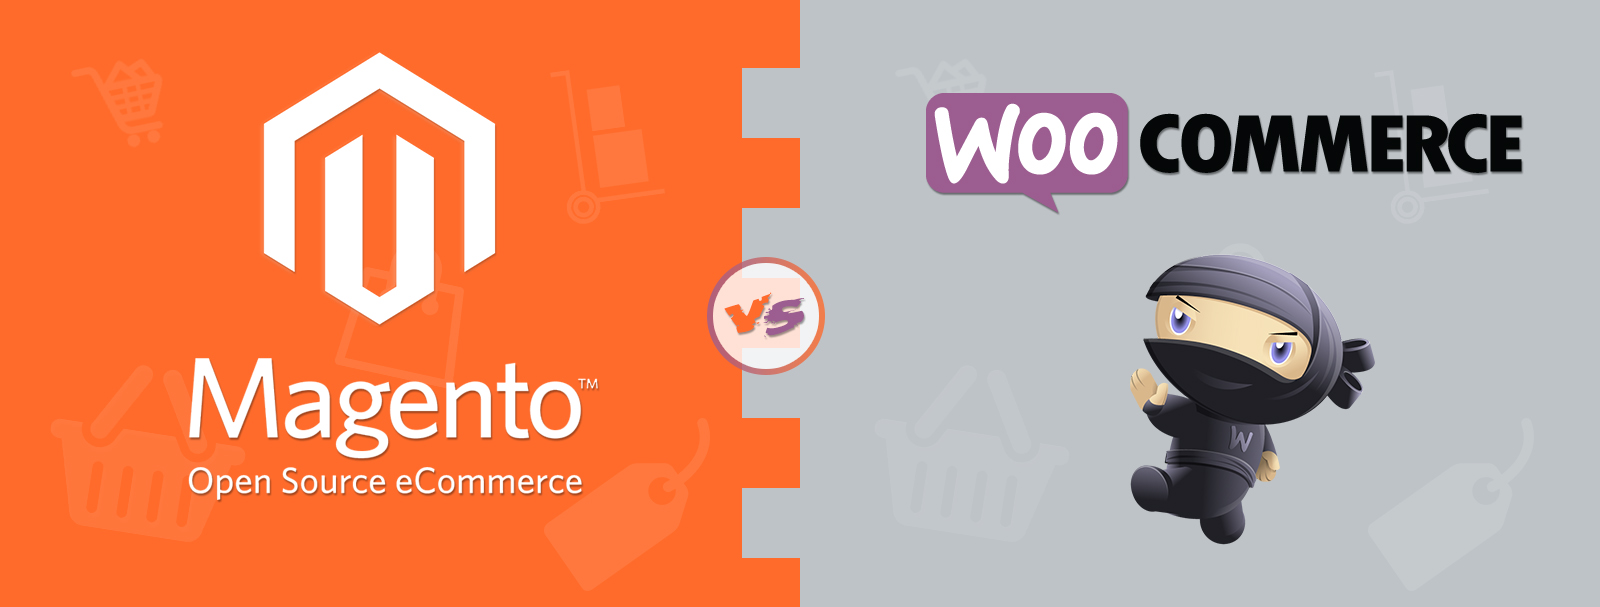 Magento News: Magneto Vs Woocommerce: which is the best e-commerce platform?